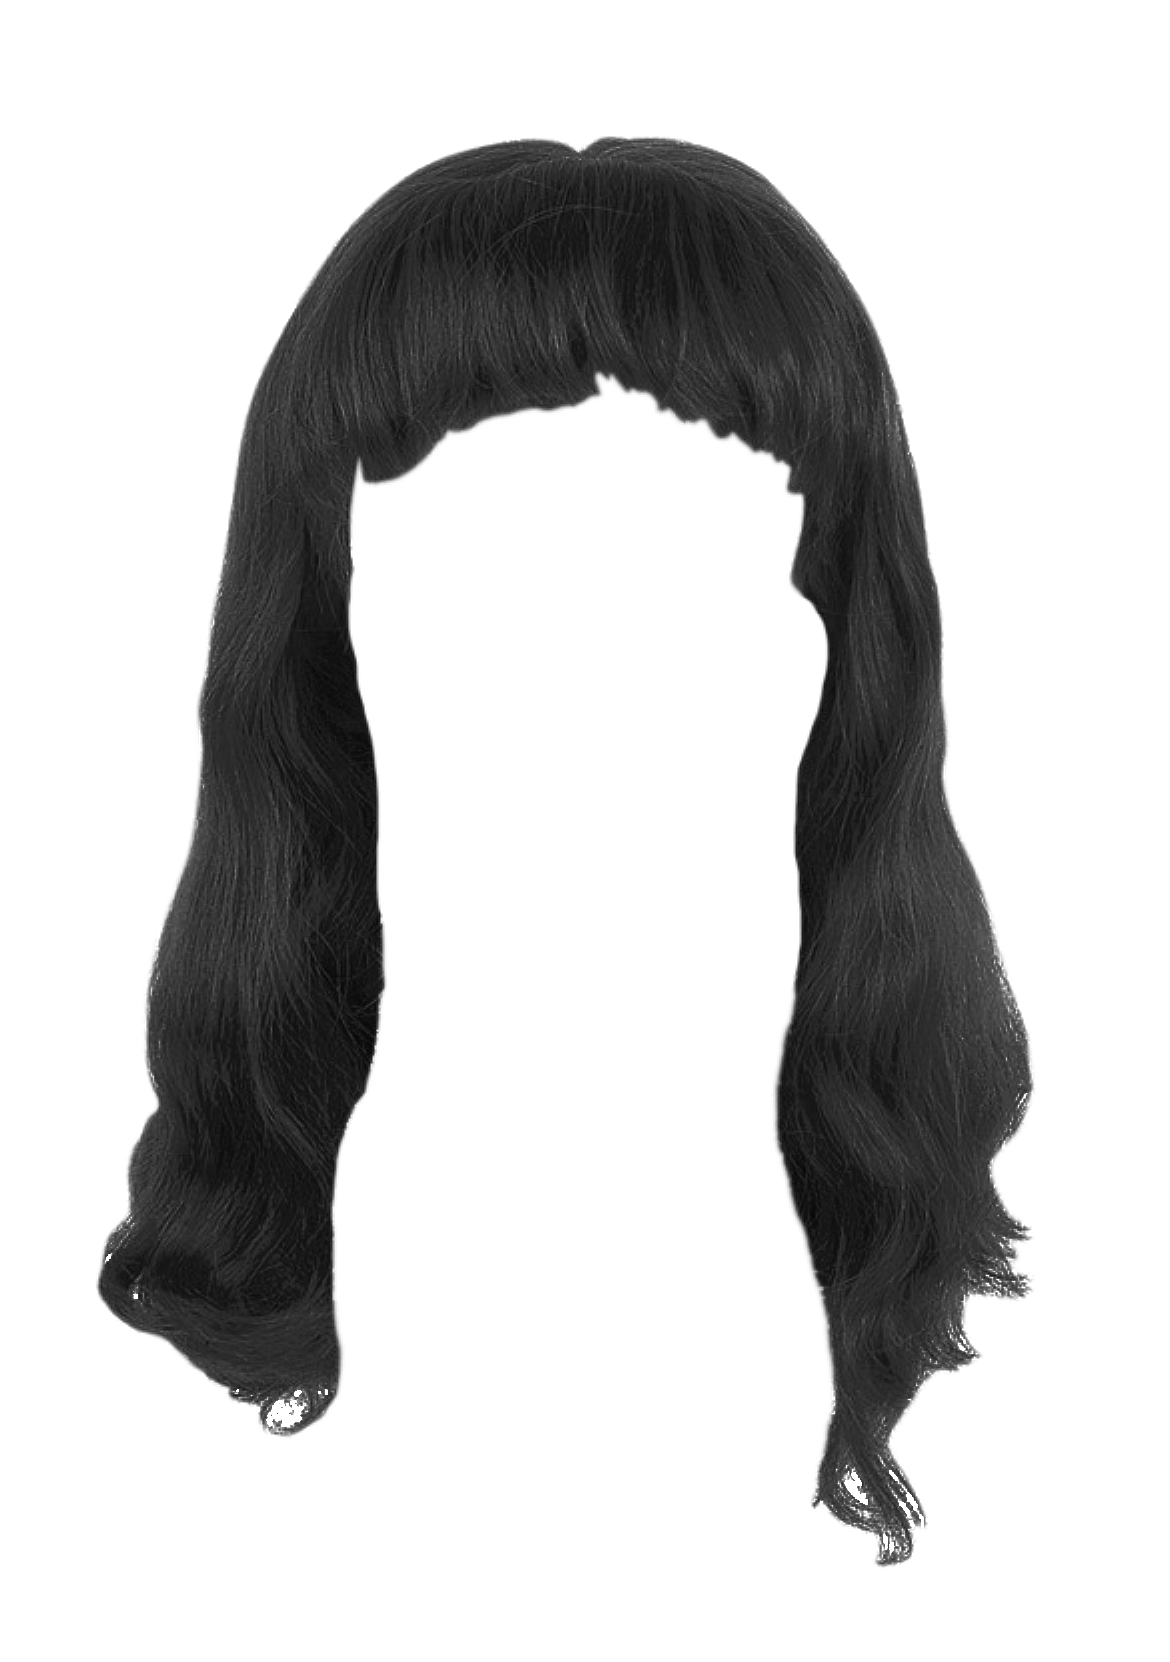 Long Black Women Hair PNG Background | PNG Play